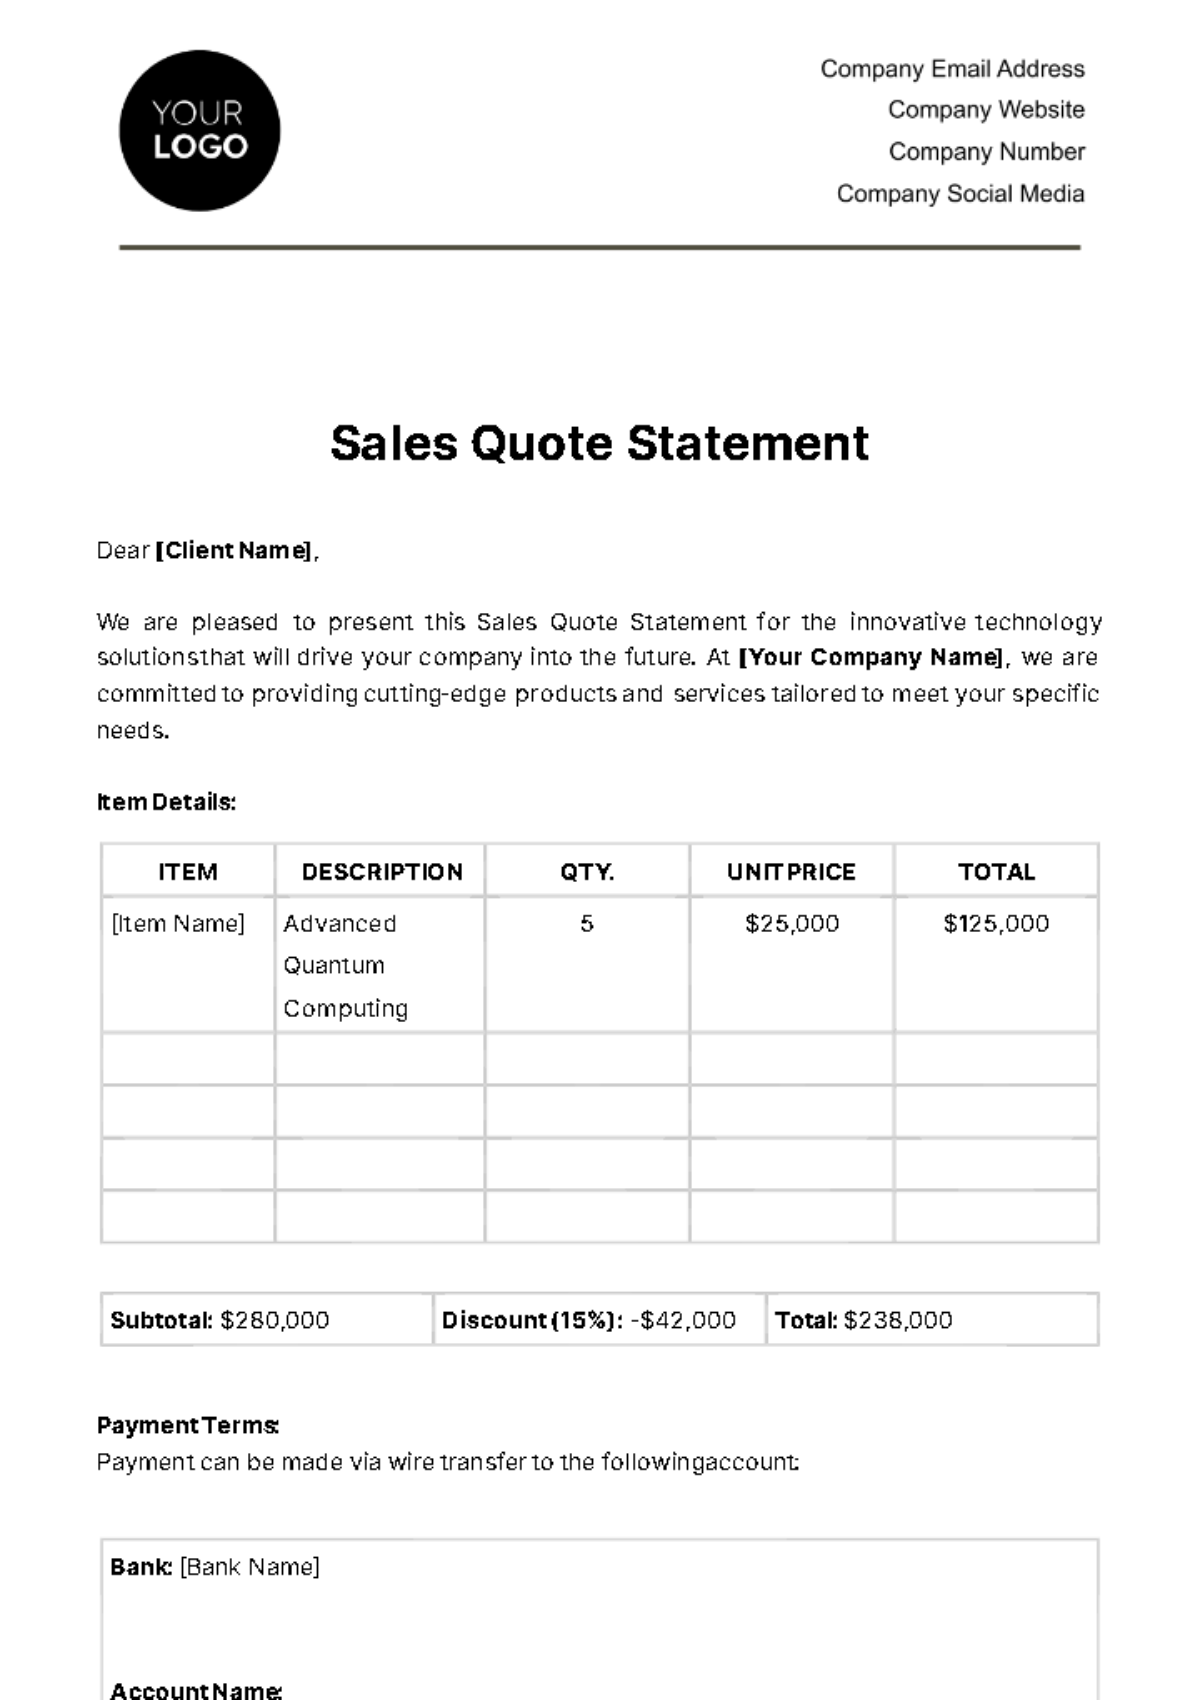 Sales Quote Statement Template